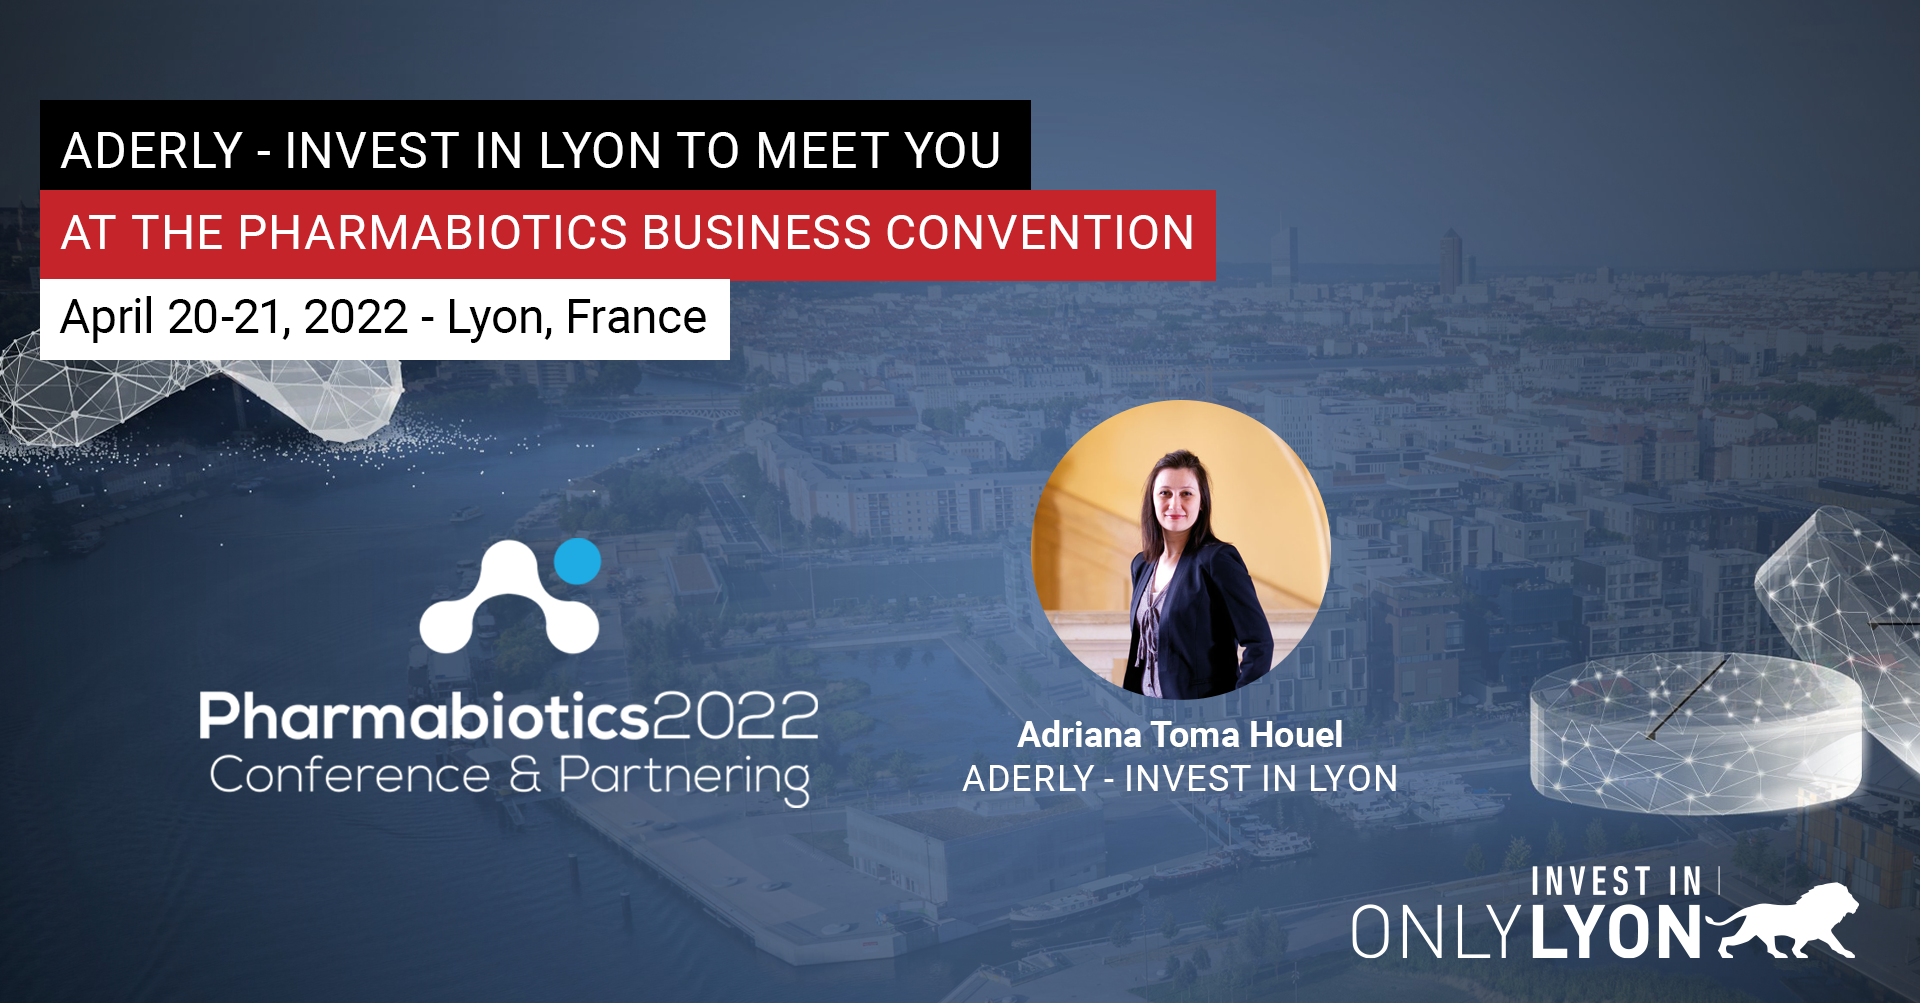 Aderly - Invest in Lyon will be delighted to meet you at the Pharmabiotics business convention